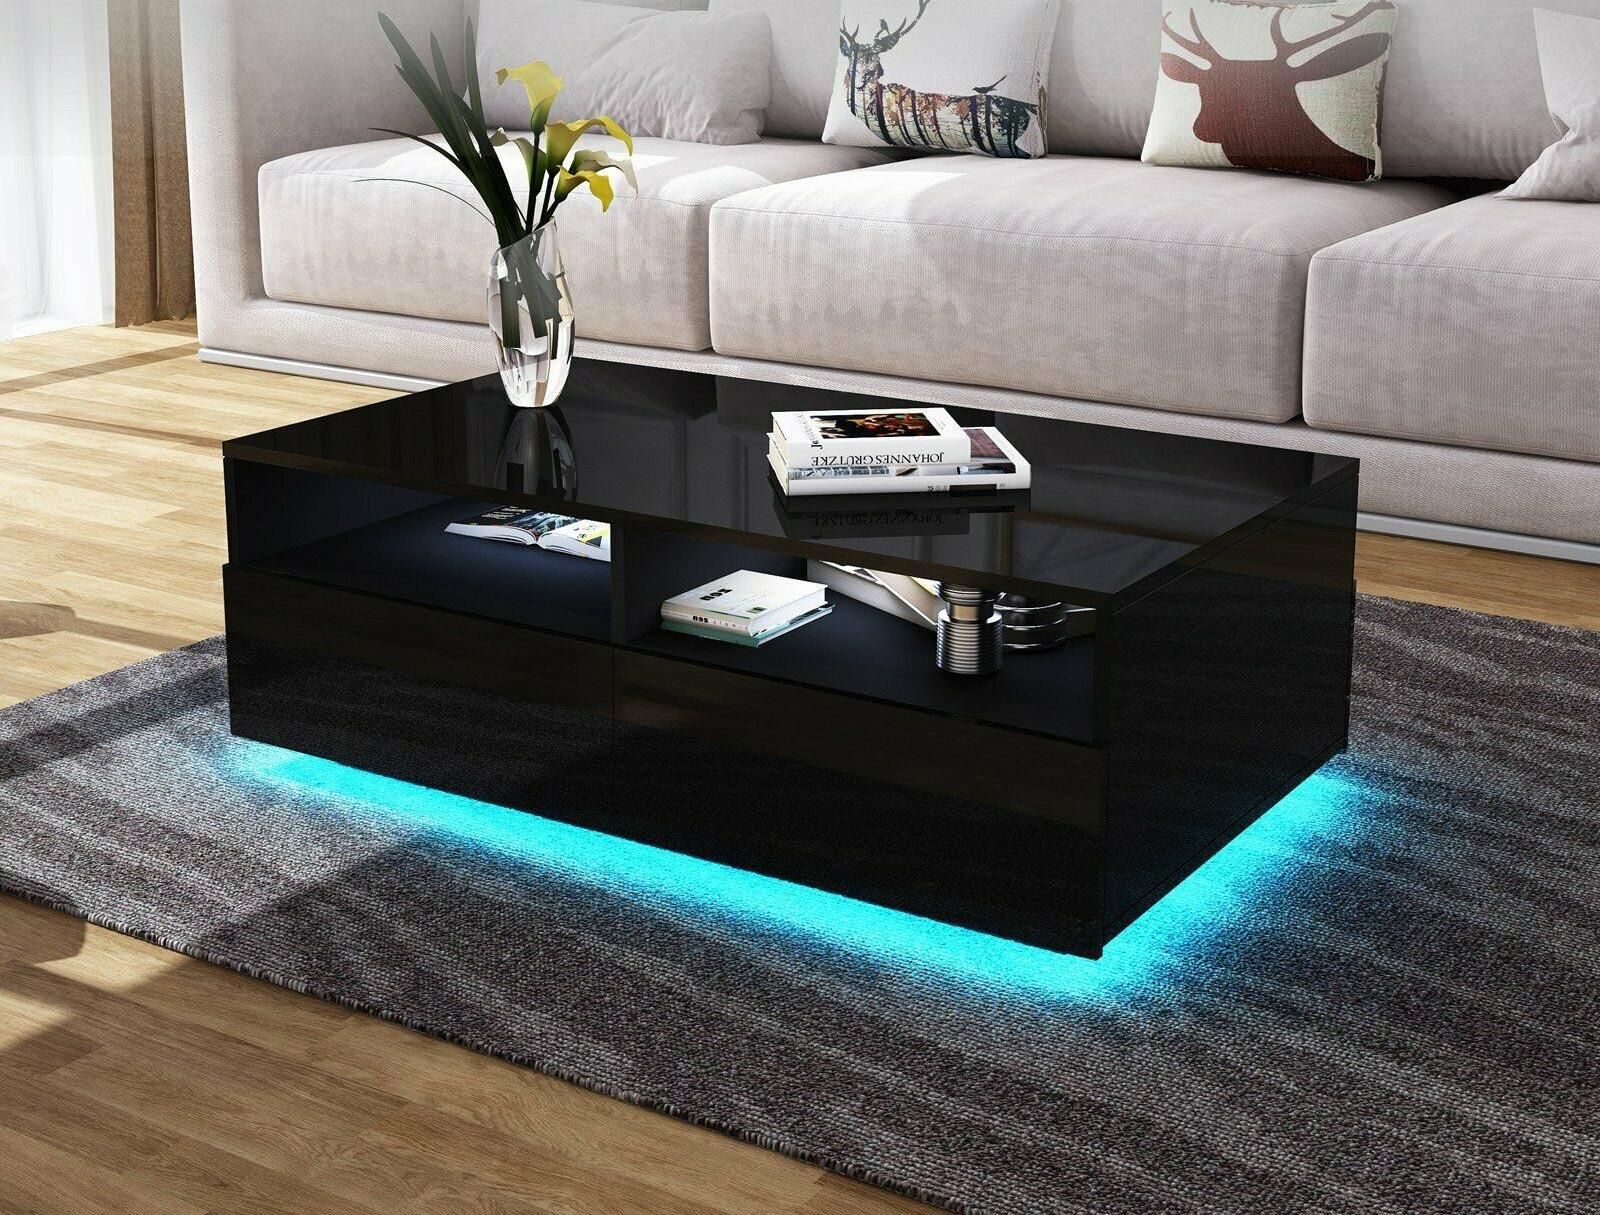 Living Room Rectangle Coffee Table 4 Drawers Rgb 16 Color Led Lights | Ebay Regarding Coffee Tables With Led Lights (Gallery 14 of 20)